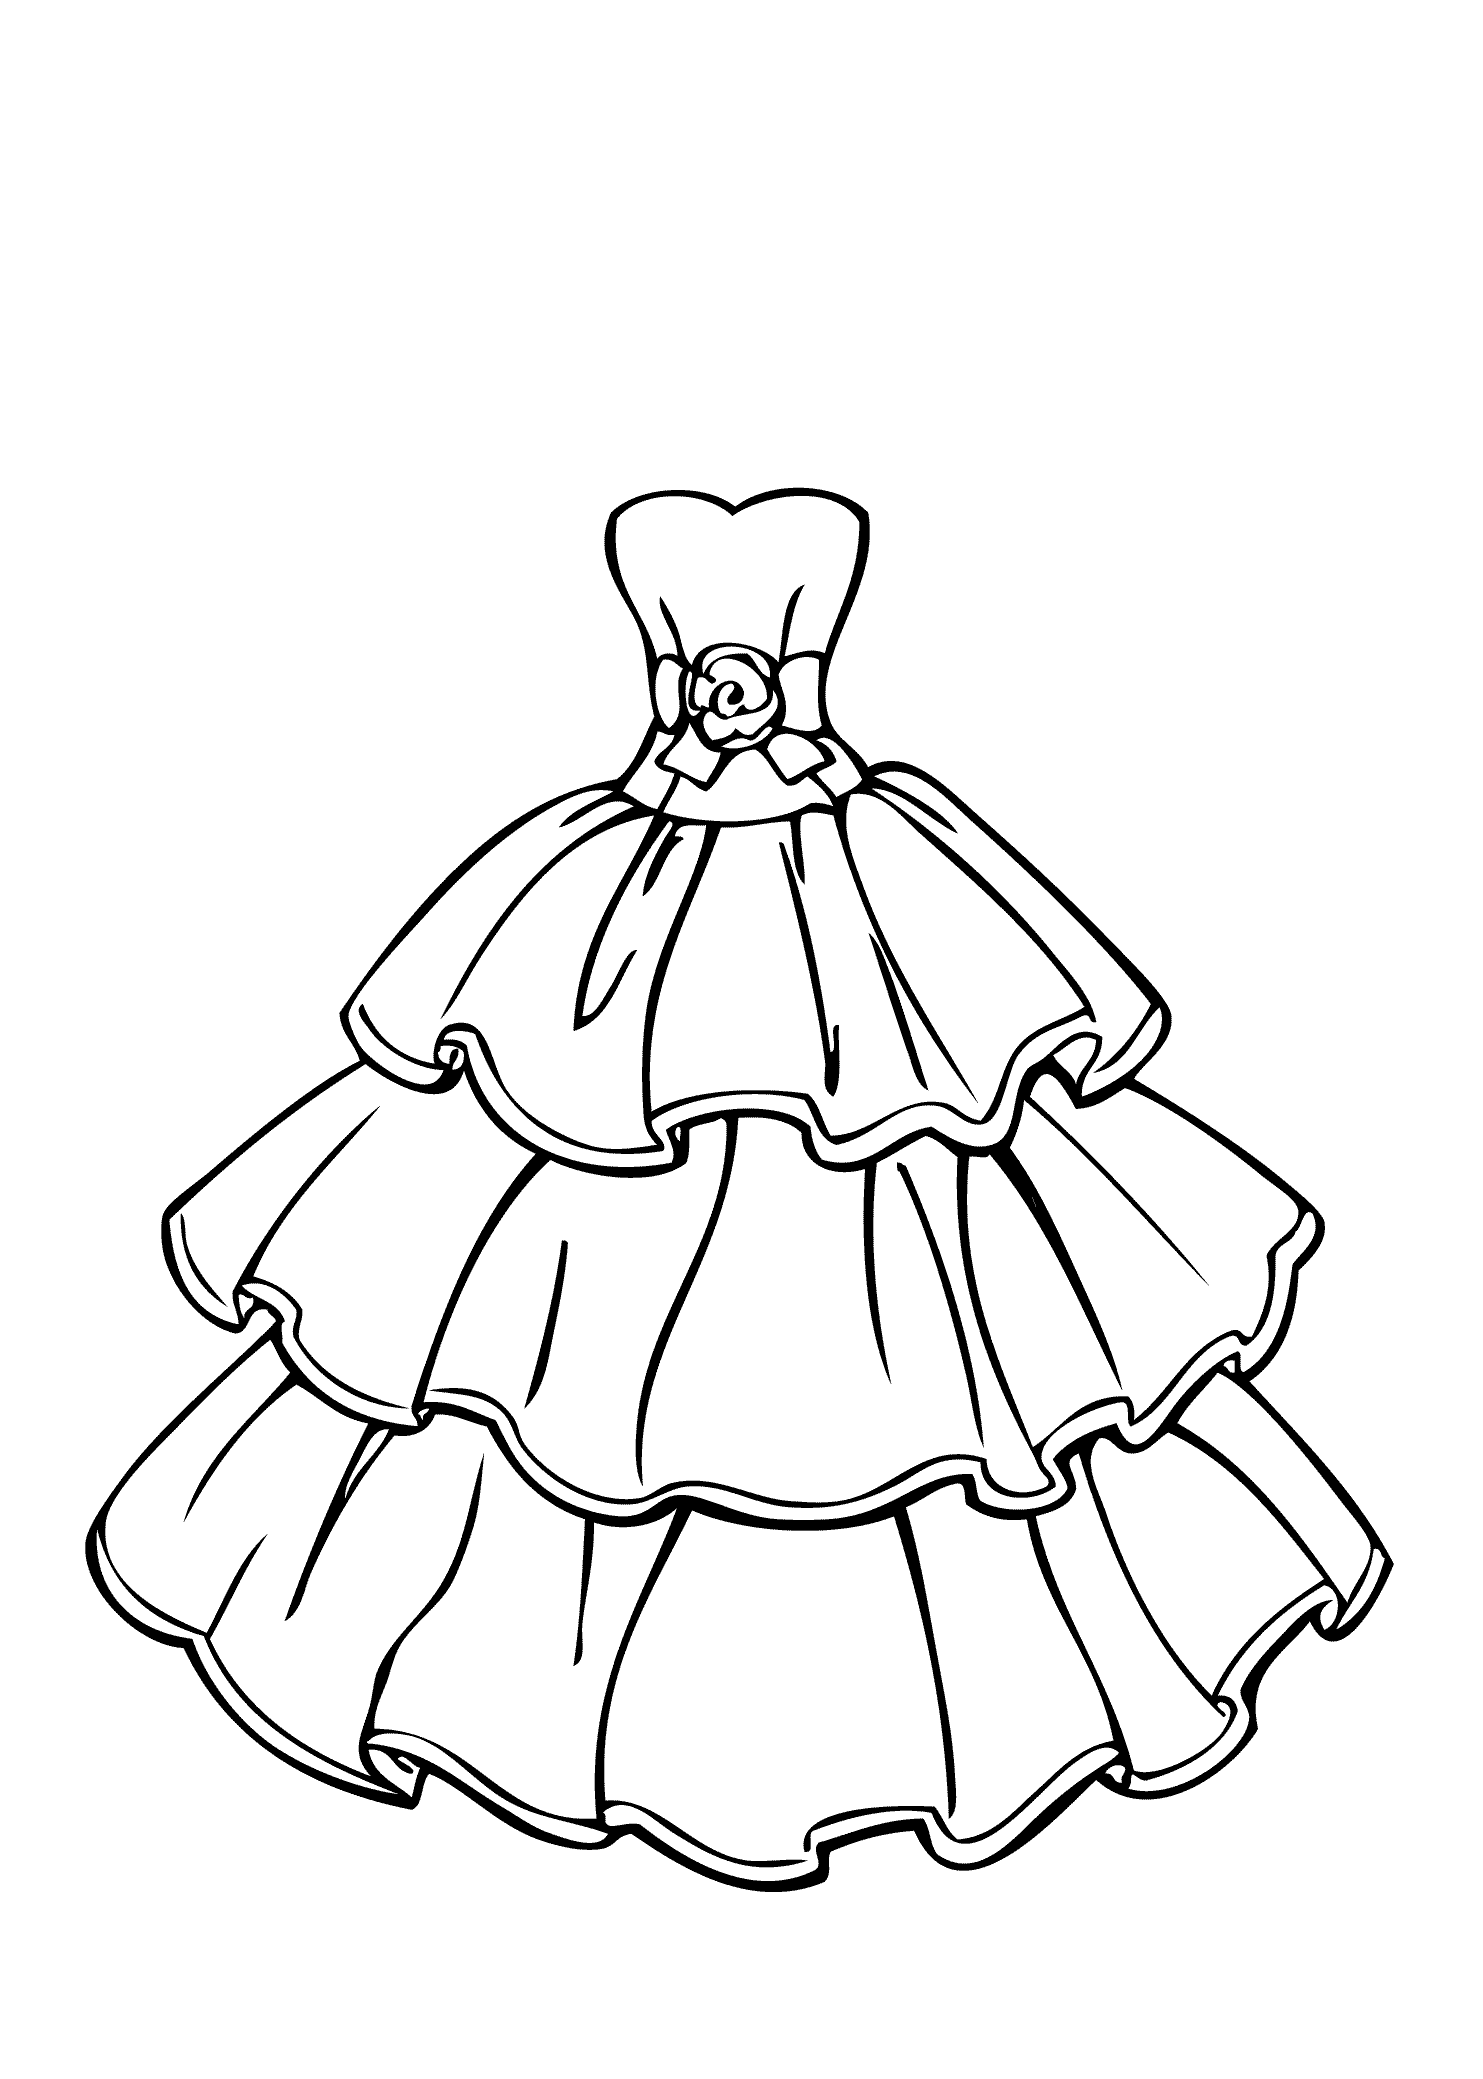 Dress coloring pages to download and print for free